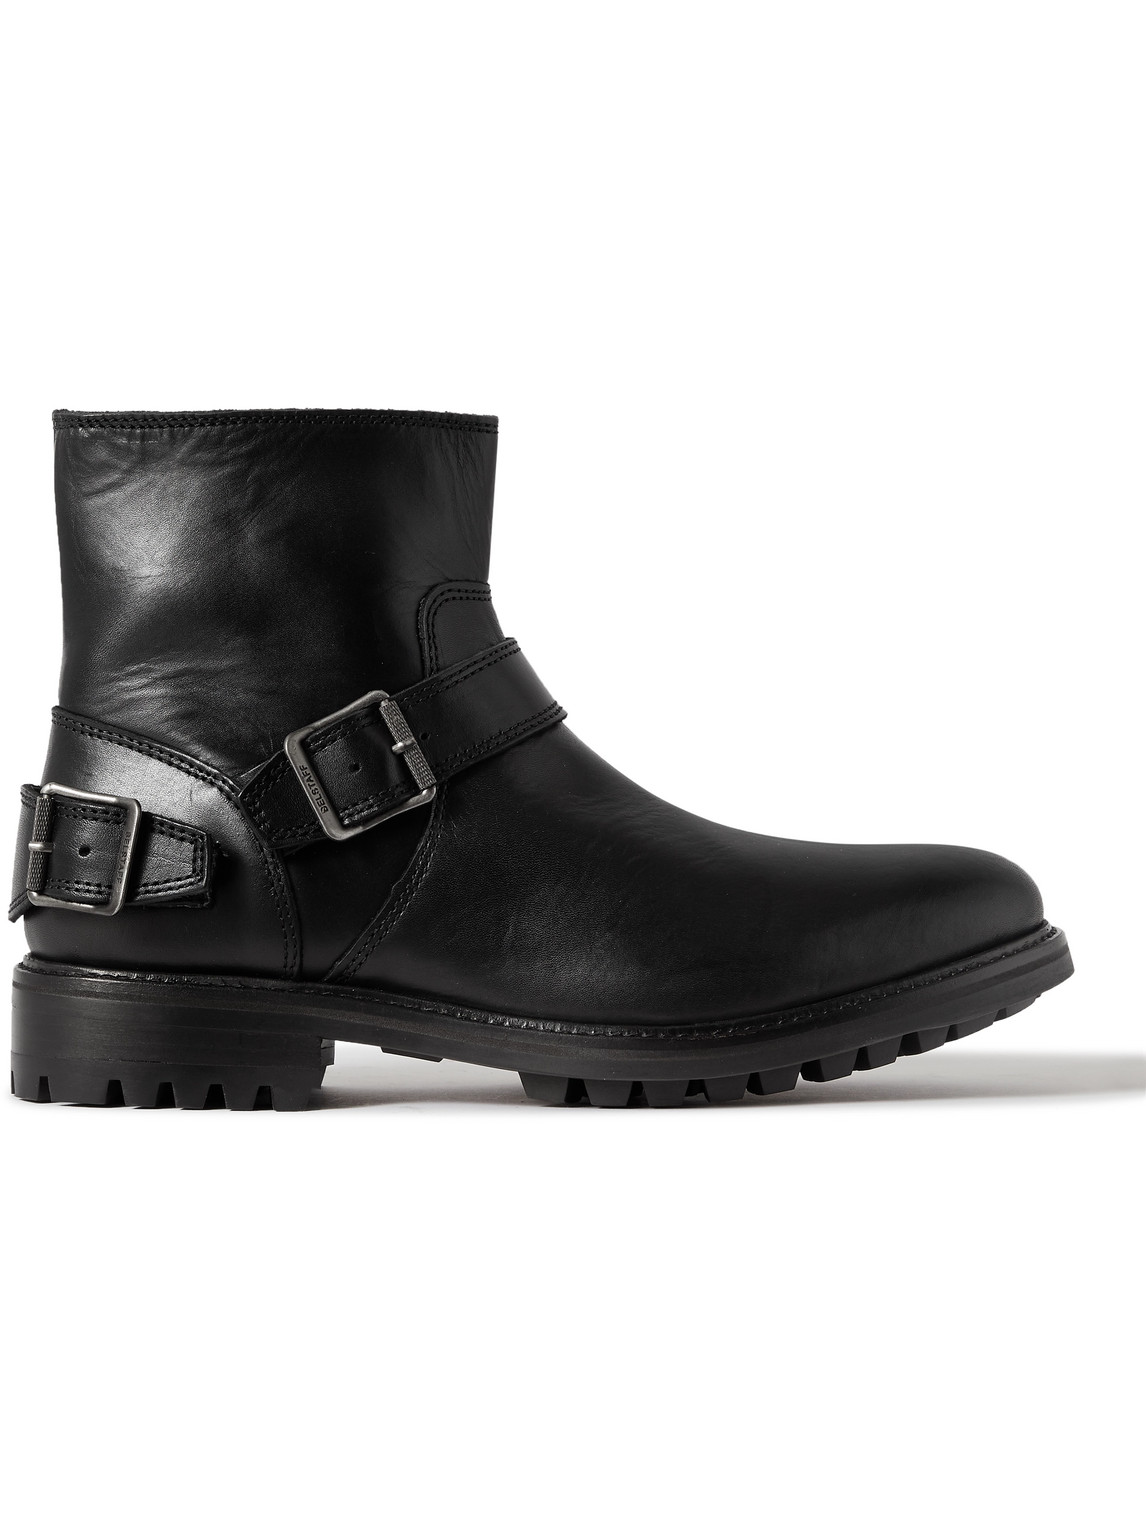 BELSTAFF TRIALMASTER LEATHER BOOTS